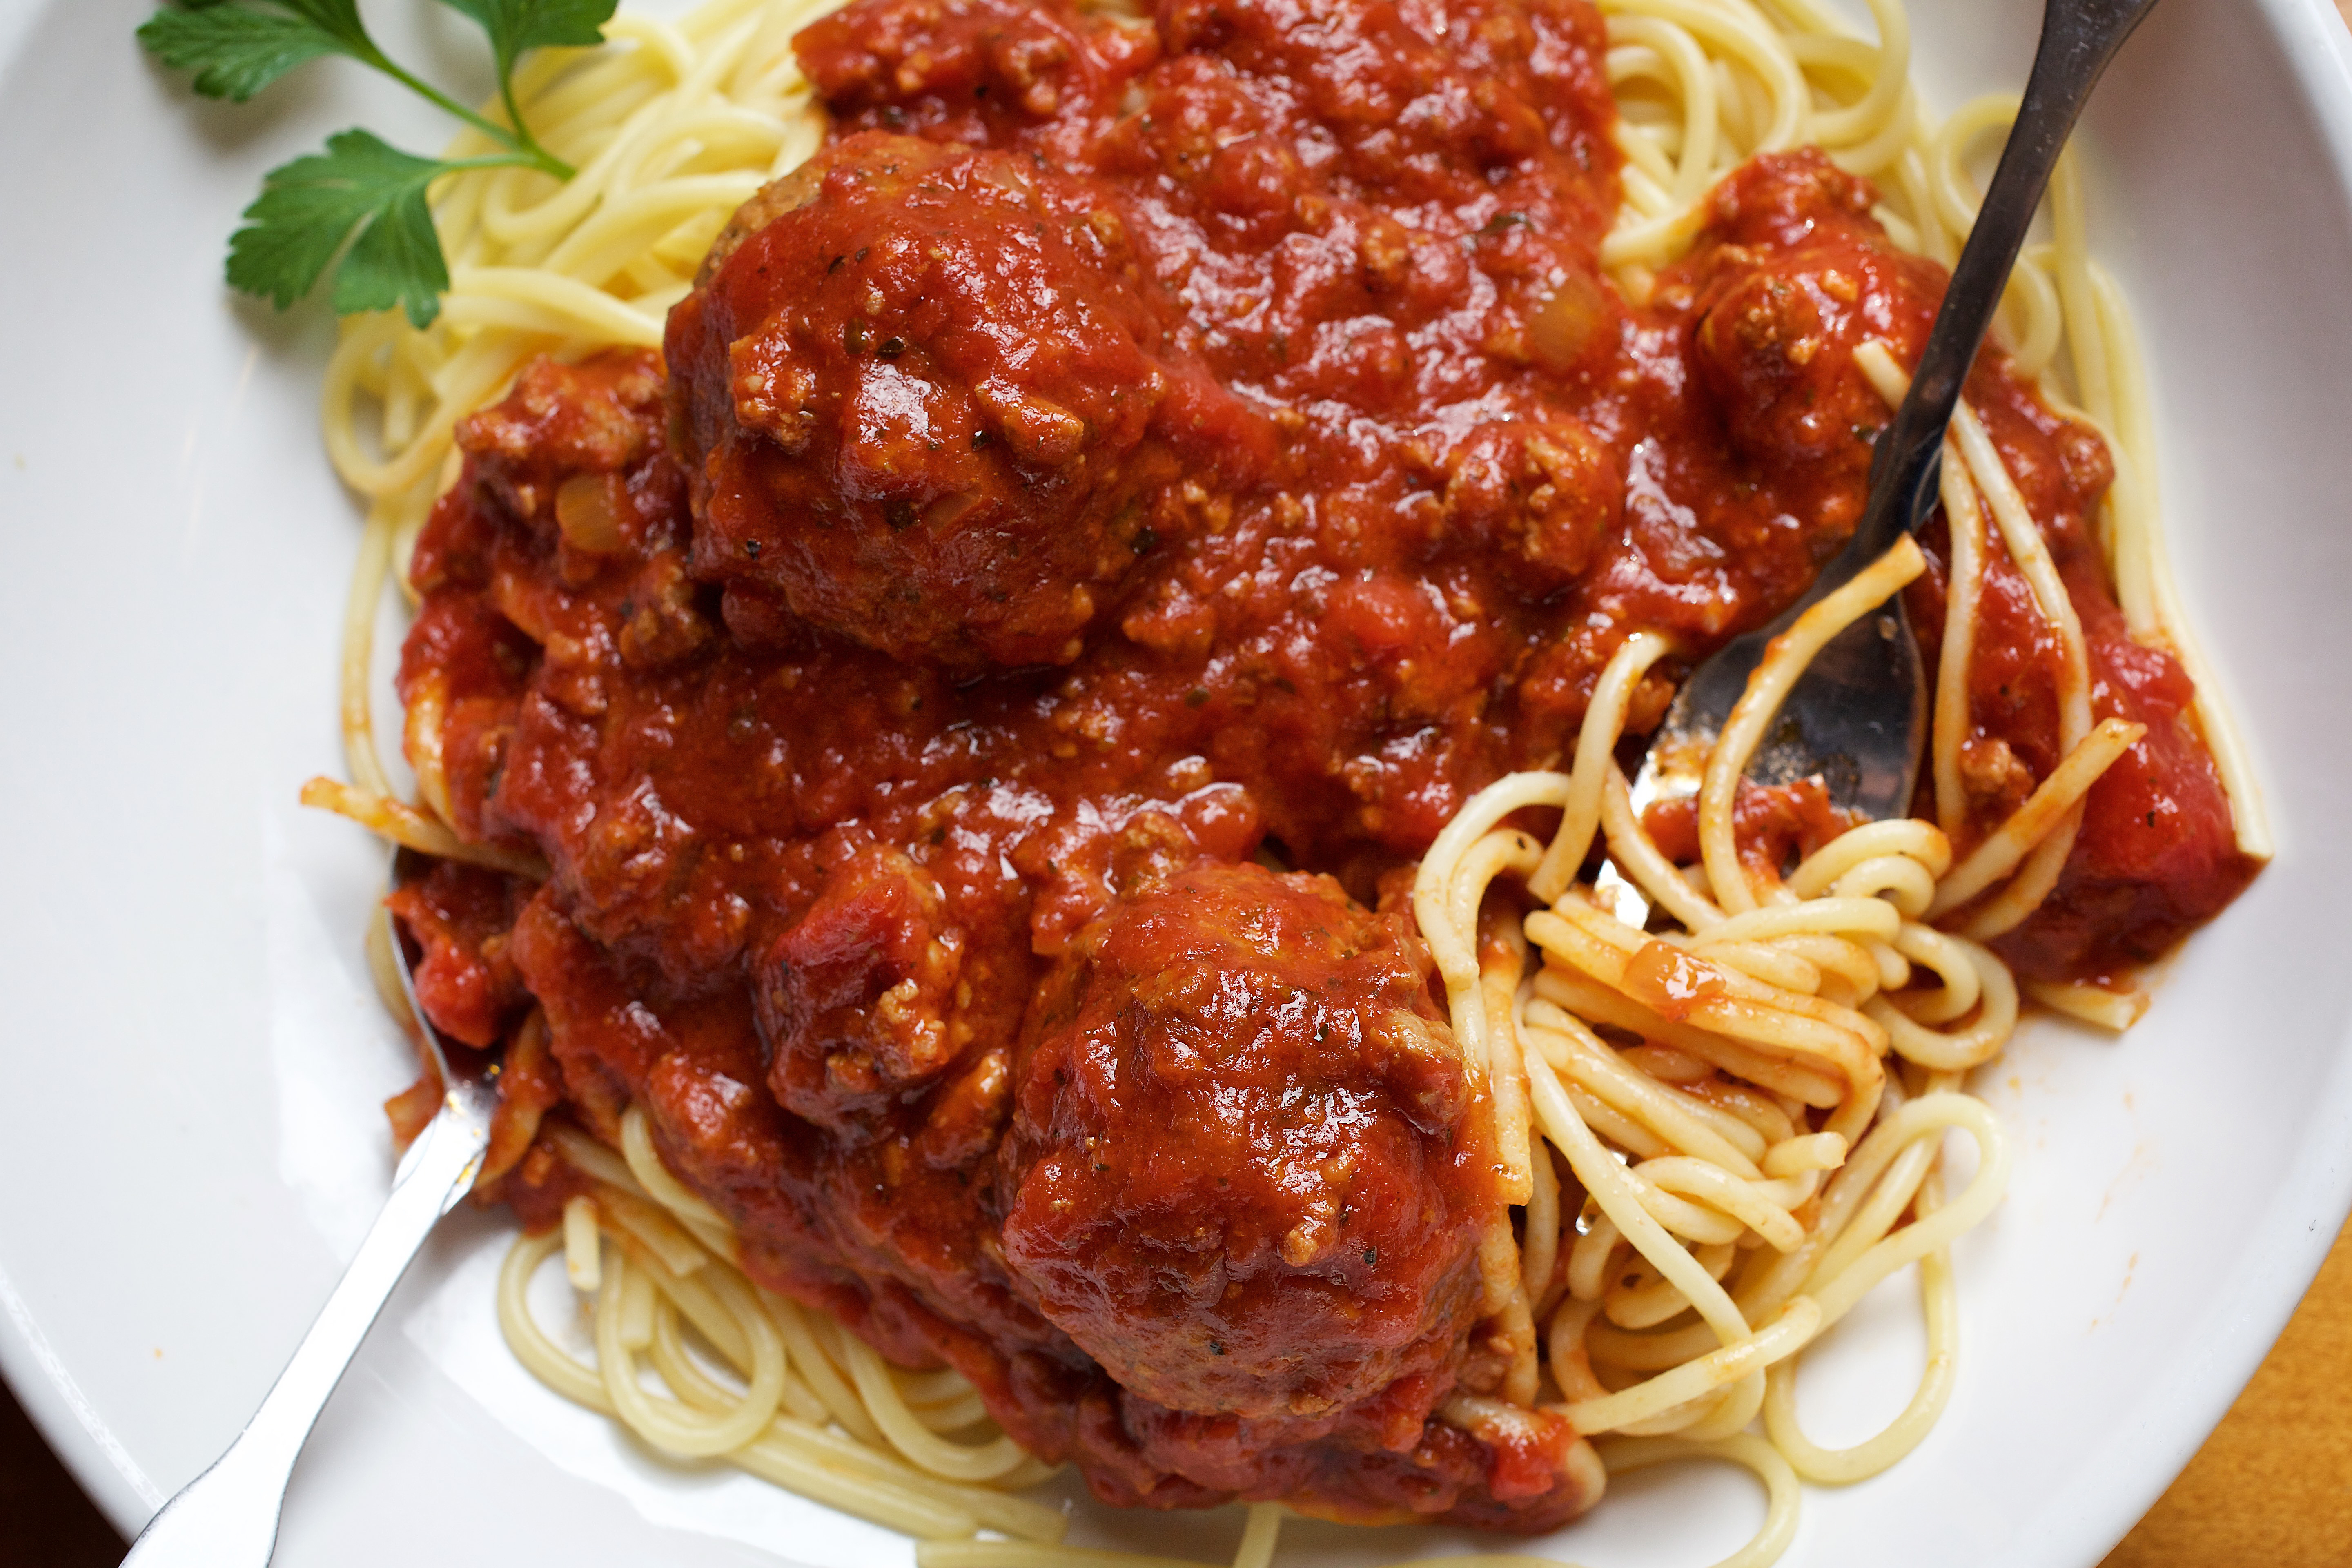 Create your own pasta--Spaghetti, Traditional Meat Sauce and Meatballs at Olive Garden photographed in Hyattsville, MD.